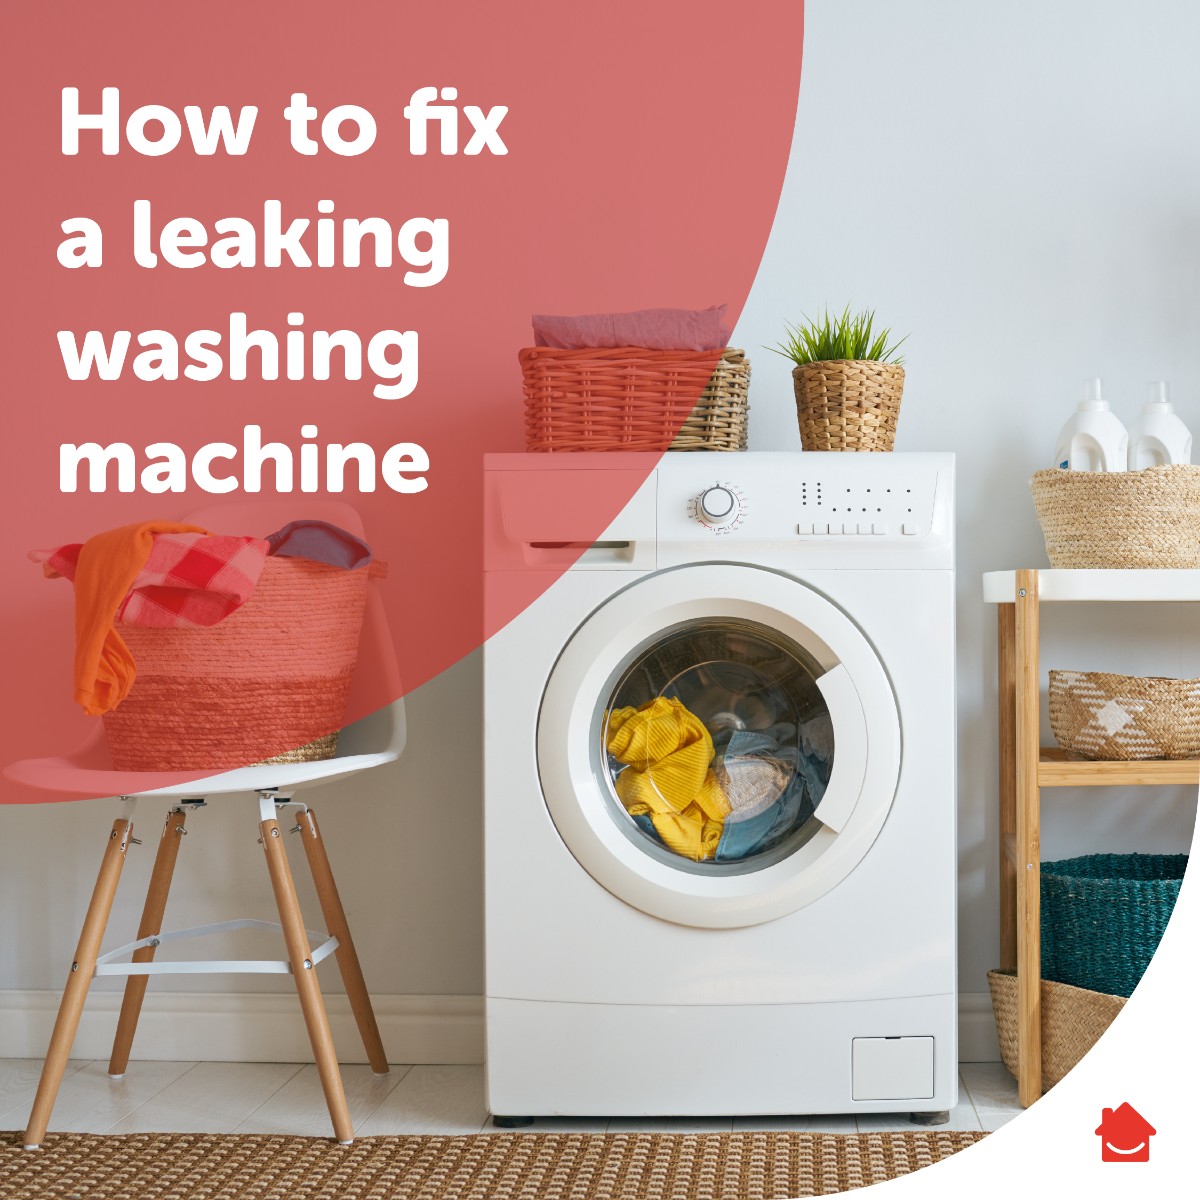 If a leaking #WashingMachine tries to leave you out to dry 🧺, check out our guide for some quick top-fix tips. brnw.ch/21wJcDA